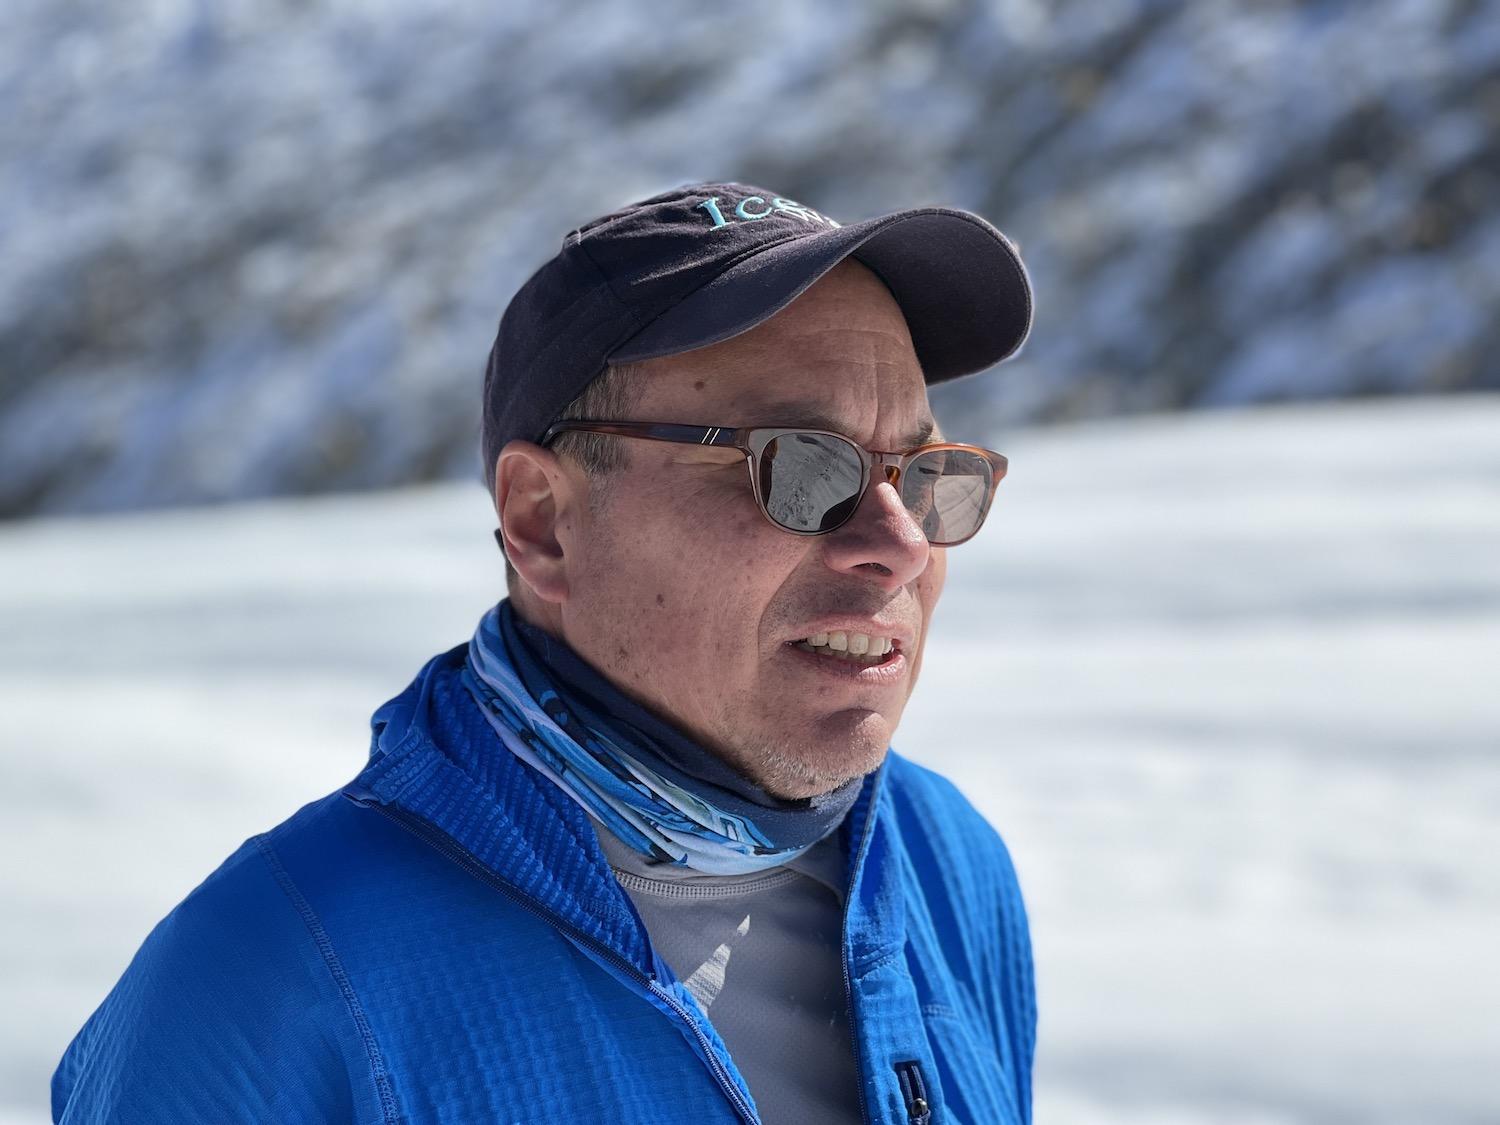 Zucmin Guiding owner Tim Patterson partners with IceWalks to offer an Indigenous perspective on the Columbia Icefields and Athabasca Glacier.